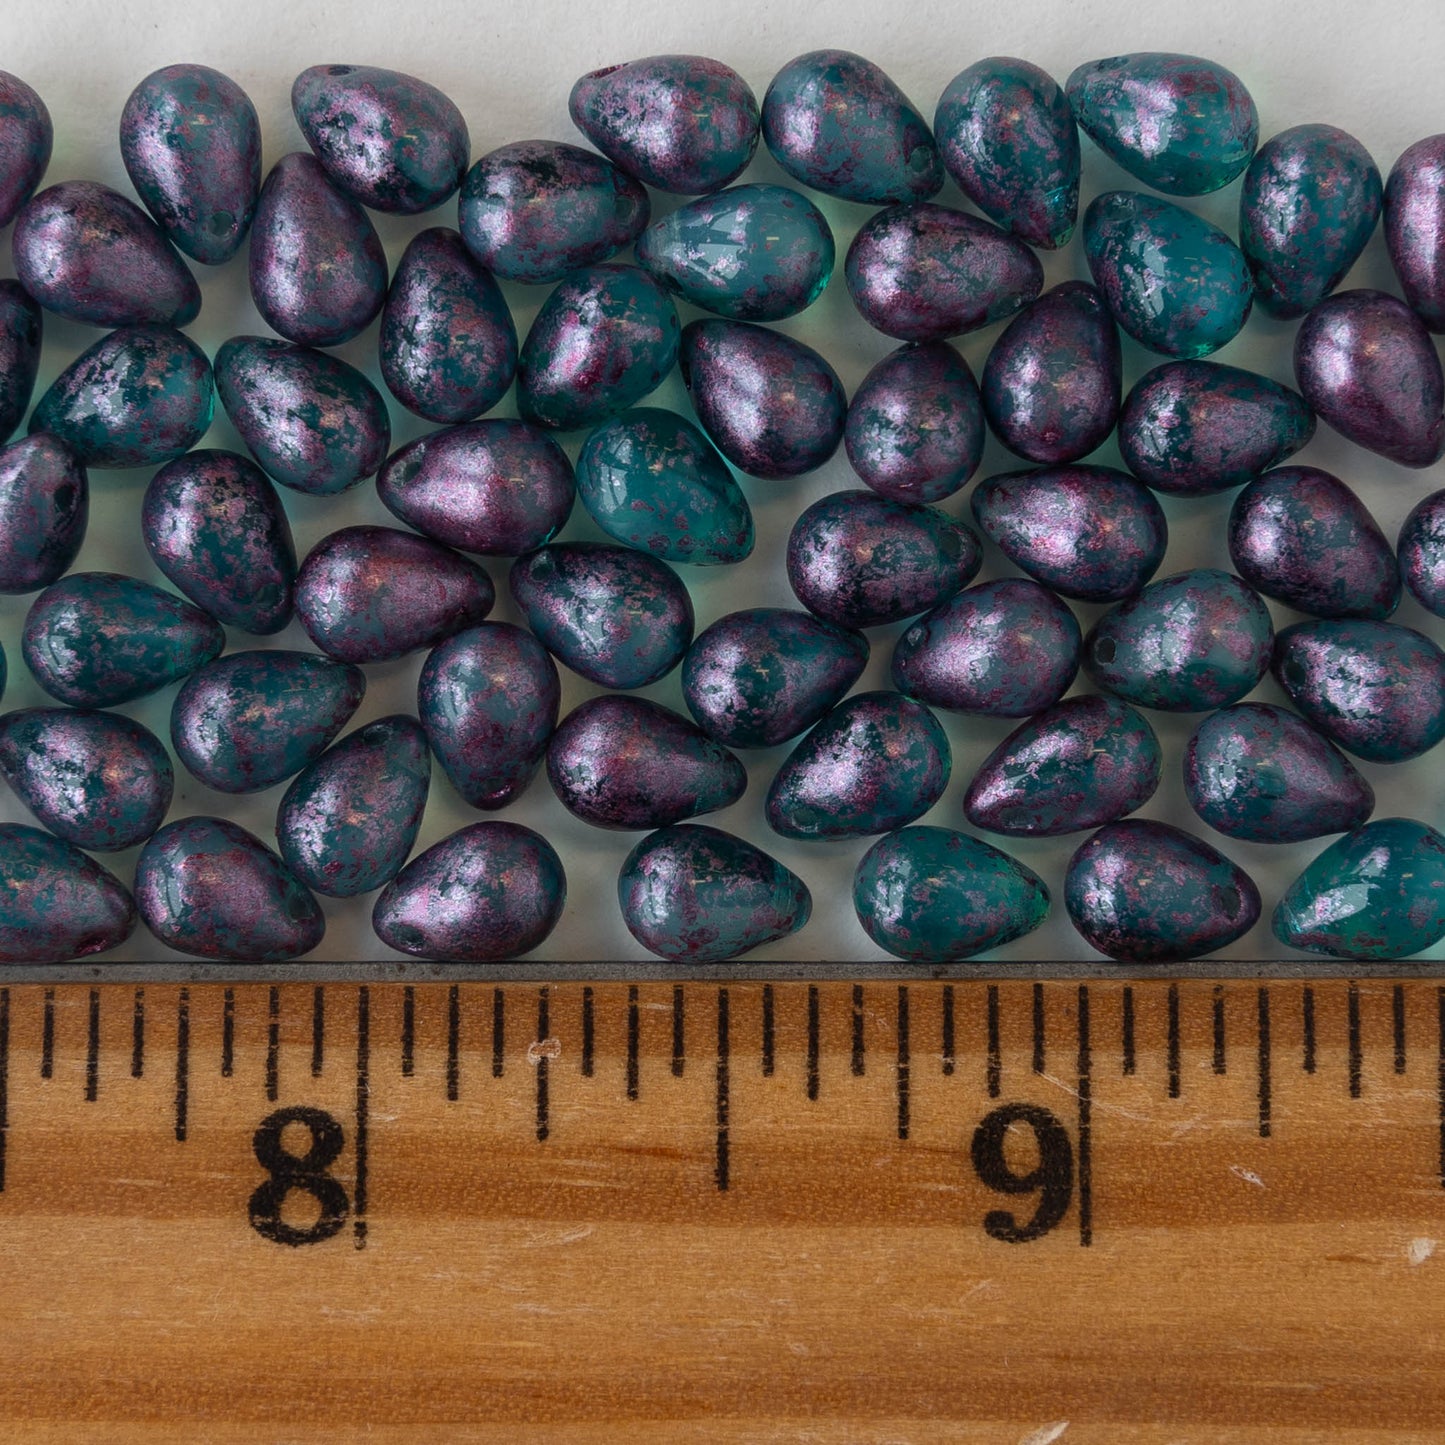 5x7mm Glass Teardrop Beads - Teal with Metallic Pink Dust - 50 Beads